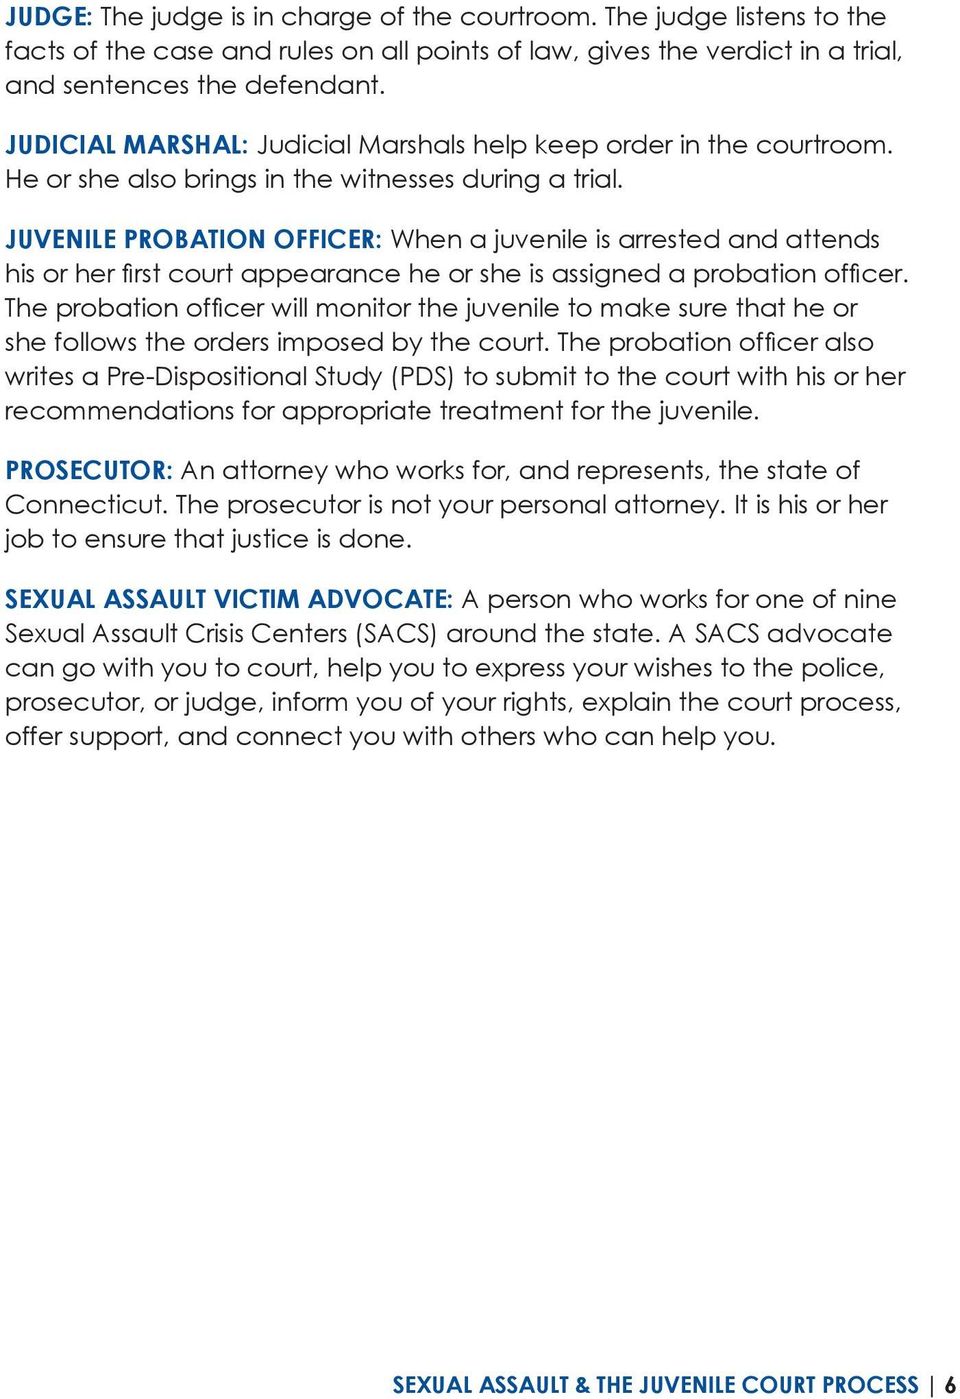 Juvenile Probation Officer: When a juvenile is arrested and attends his or her first court appearance he or she is assigned a probation officer.